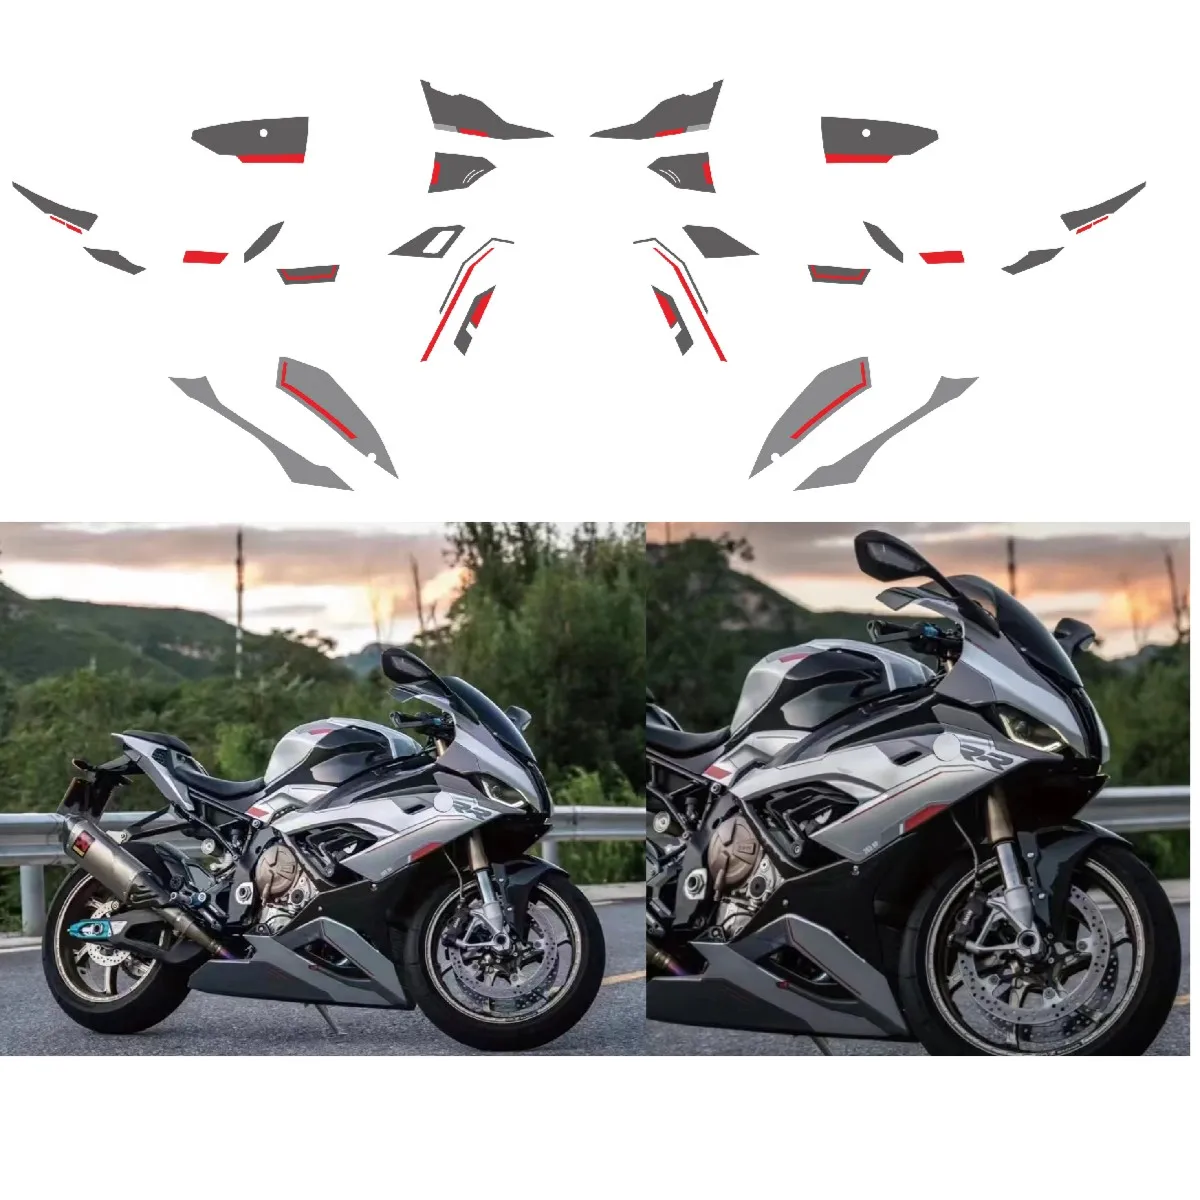 Motorcycle fairing sticker is suitable for M1000RR S1000RR 2019 2020 2021 2022 Auto Expo sticker protection brand logo sticker 2020 luxury brand belts for men